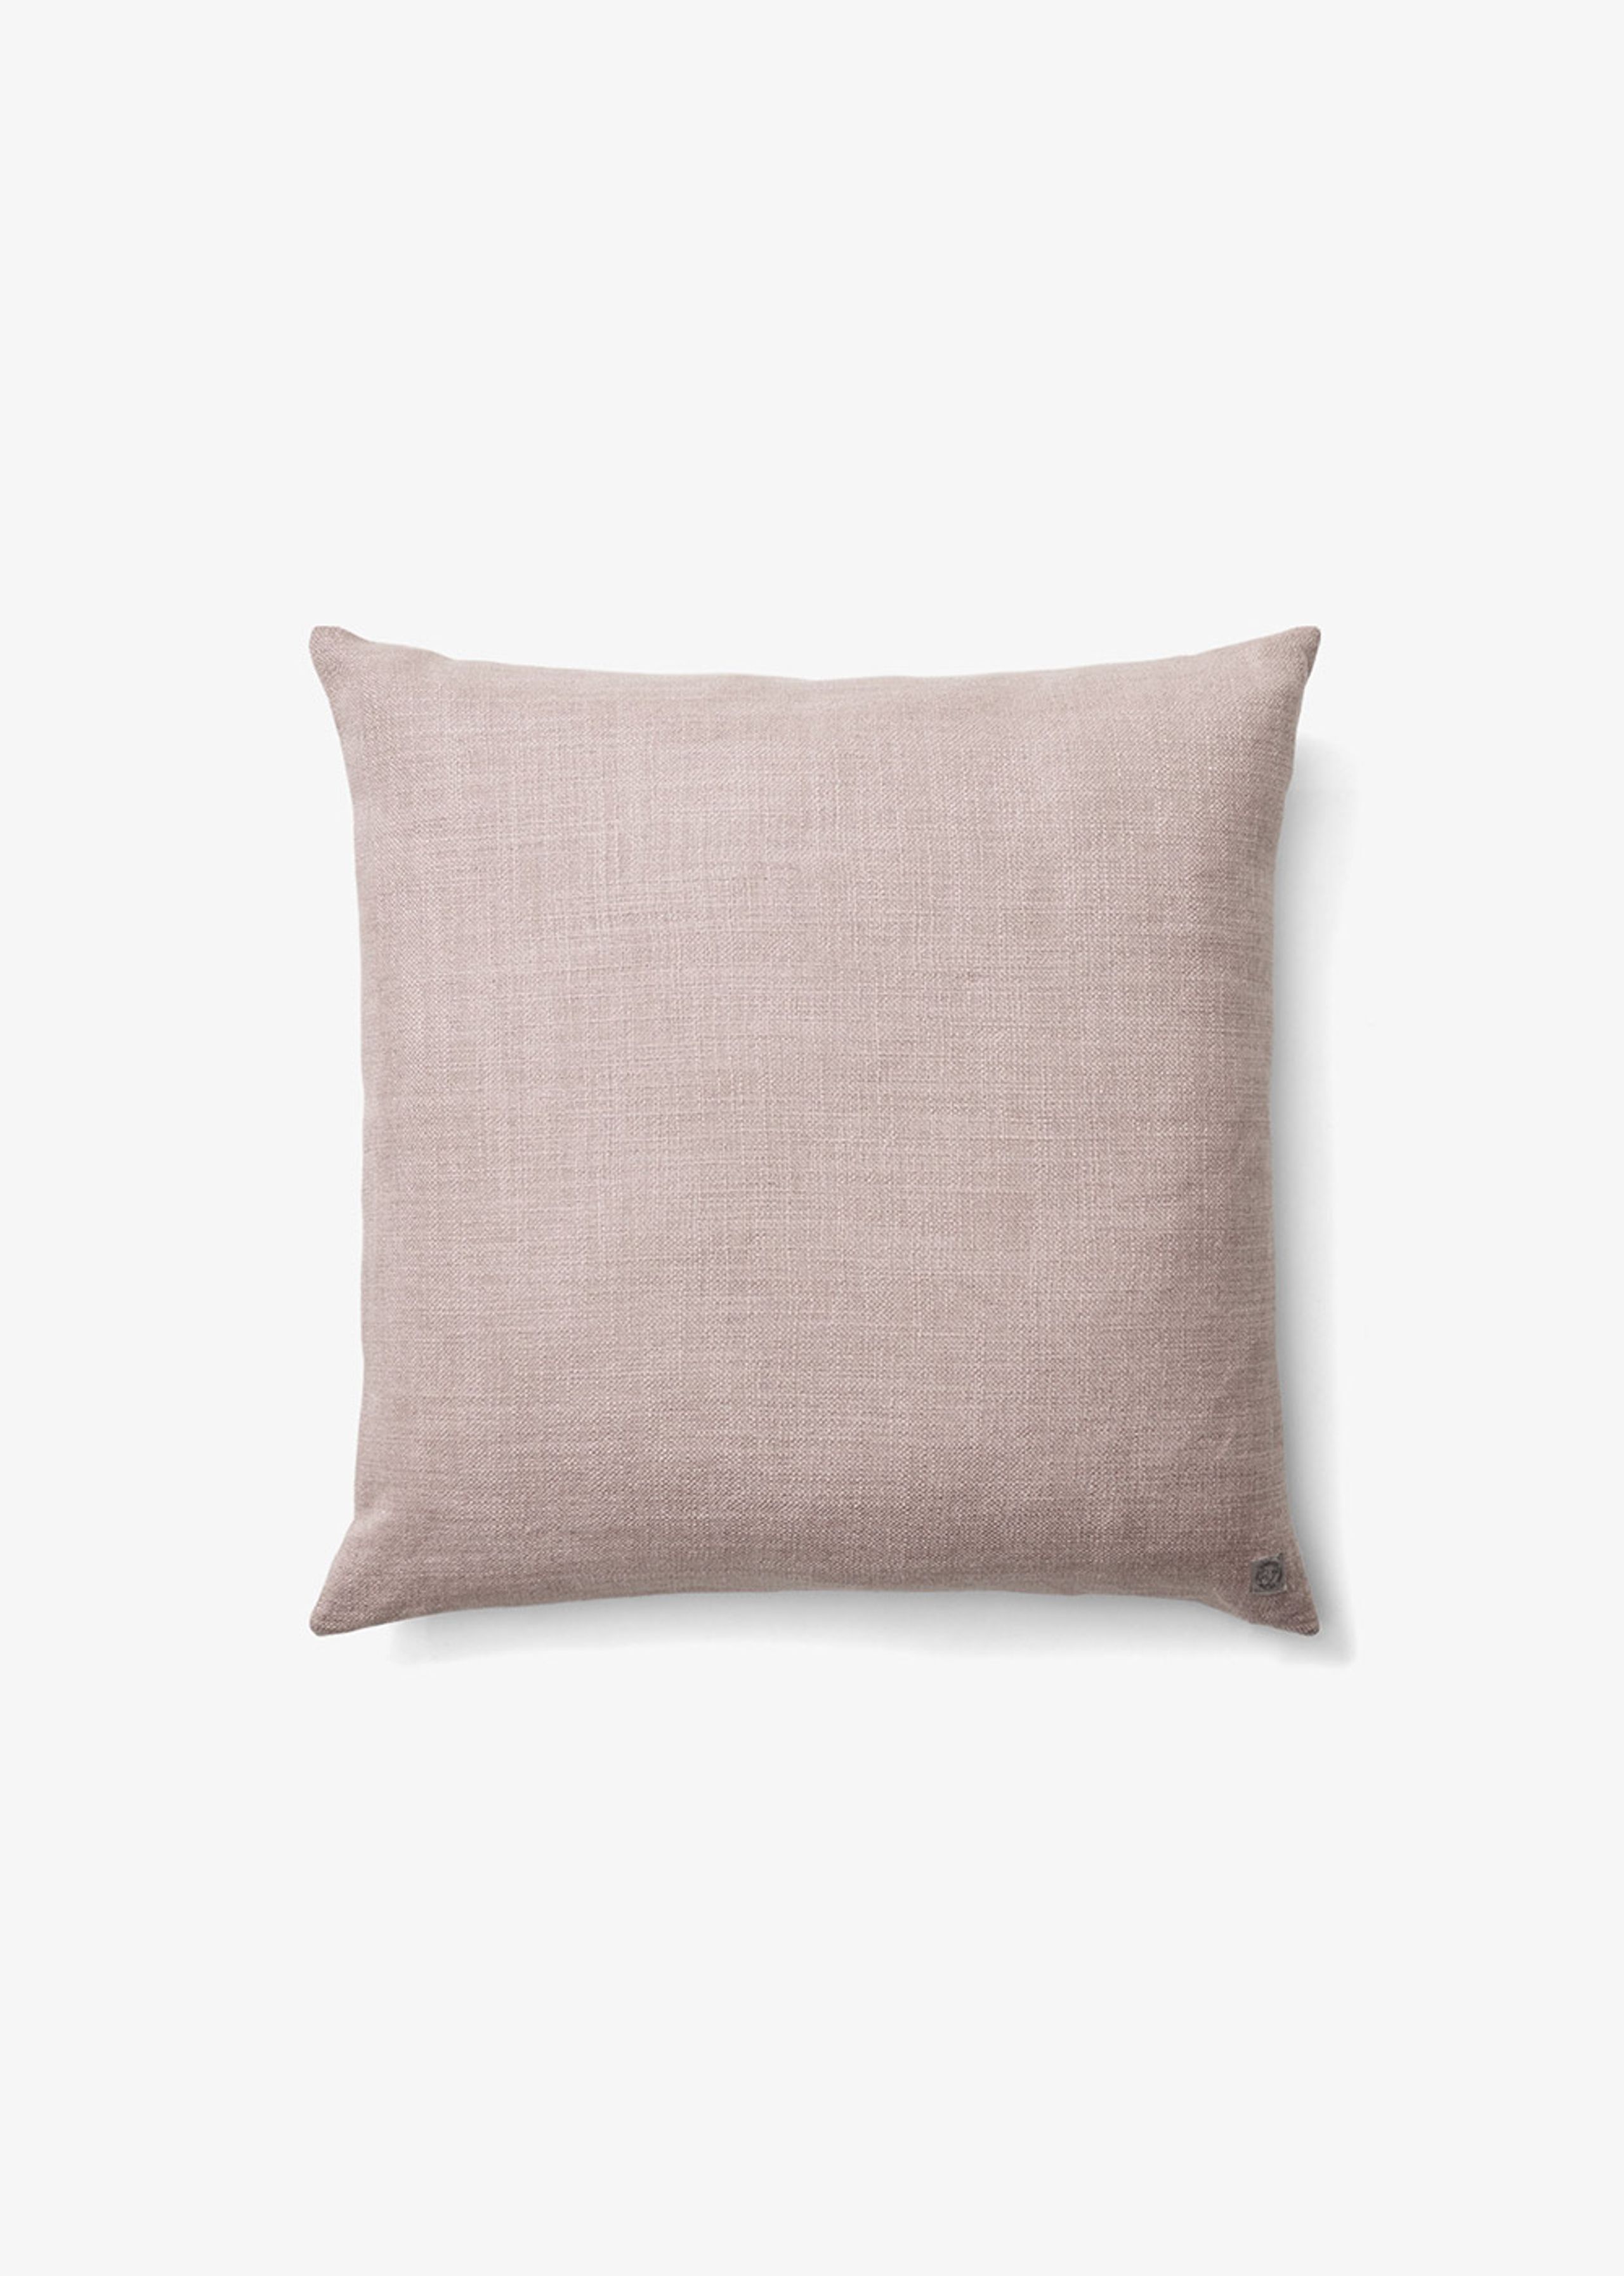 &tradition - Coussin - &tradition Collect - Linen - SC29 - Powder